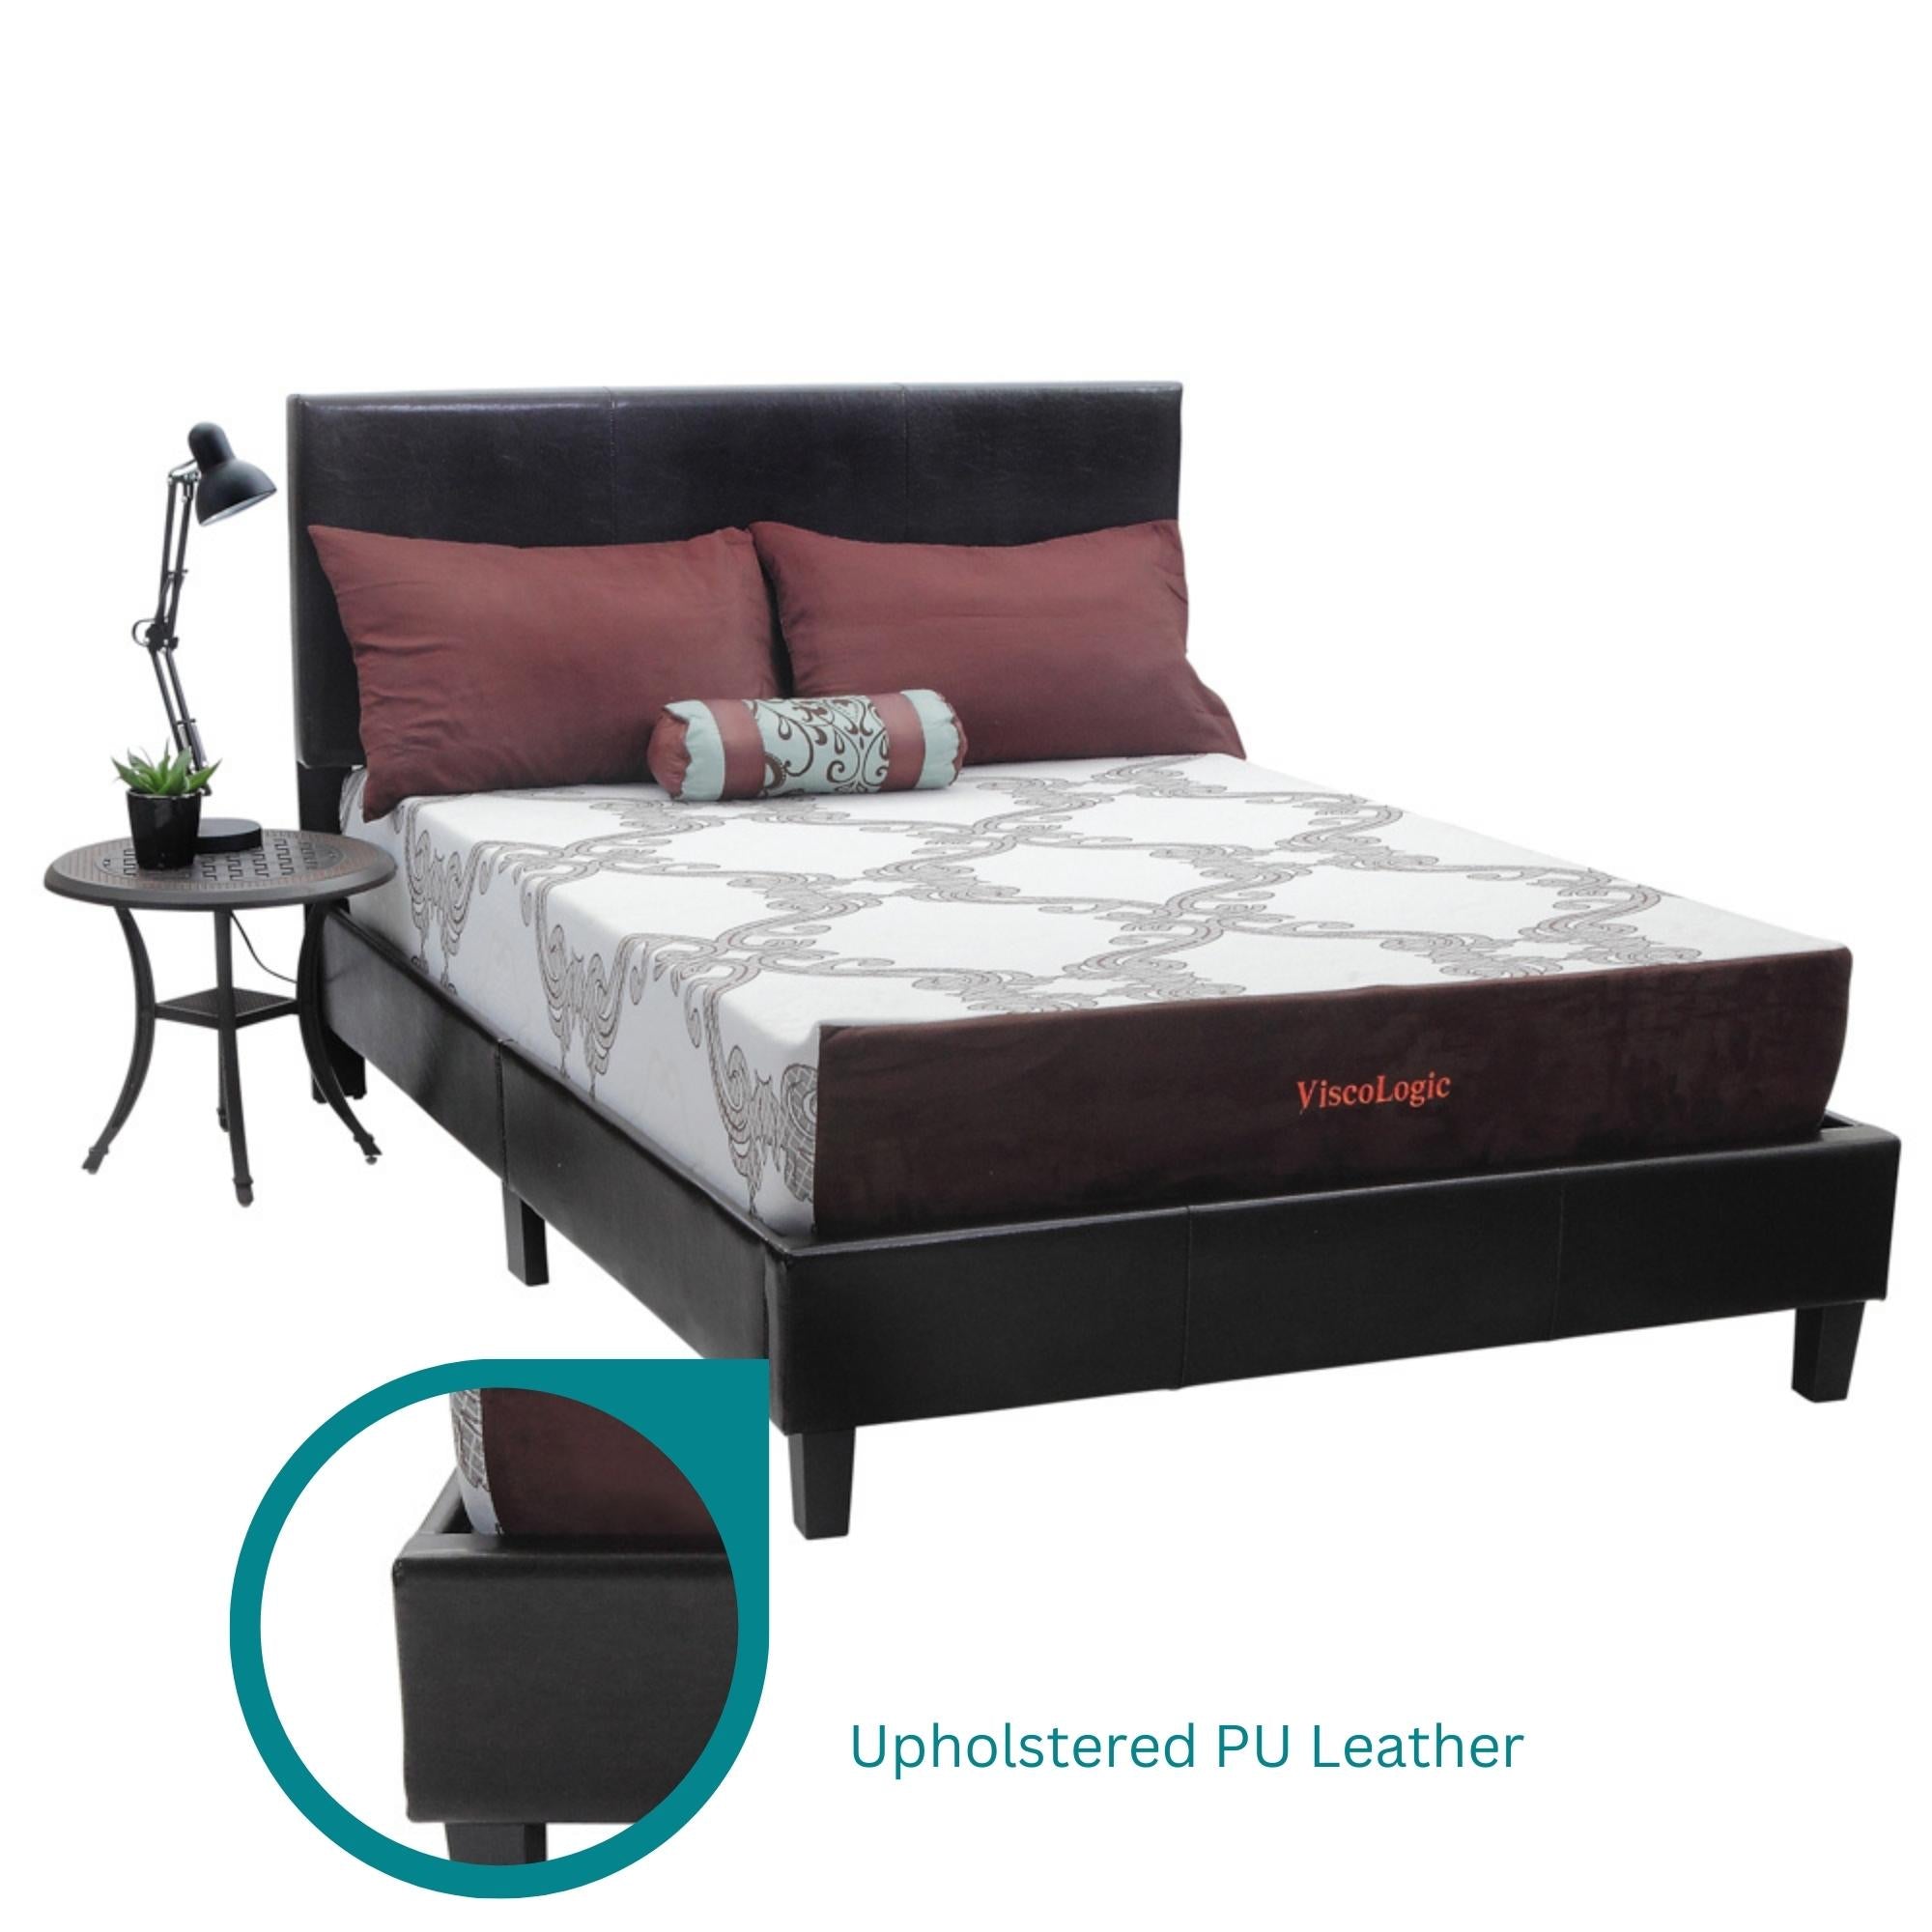 ViscoLogic Luca Platform Bed with Faux Leather Headboard / Foot-board and Rails (Brown)